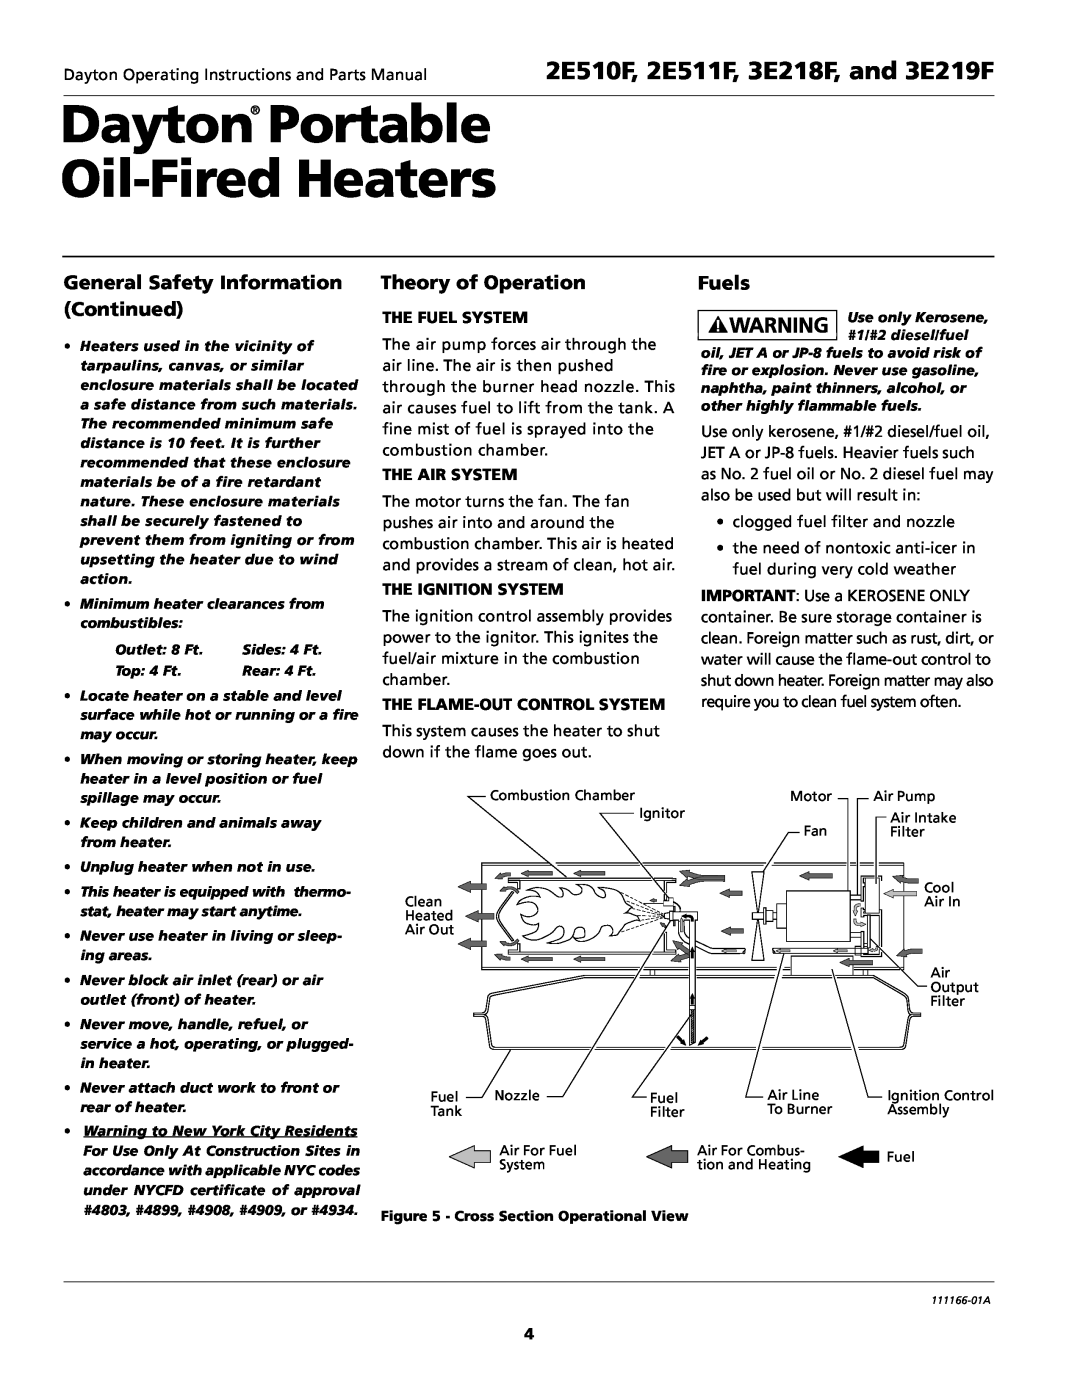 Dayton 5S1792 Dayton Portable Oil-Fired Heaters, 2E510F, 2E511F, 3E218F, and 3E219F, General Safety Information, Fuels 